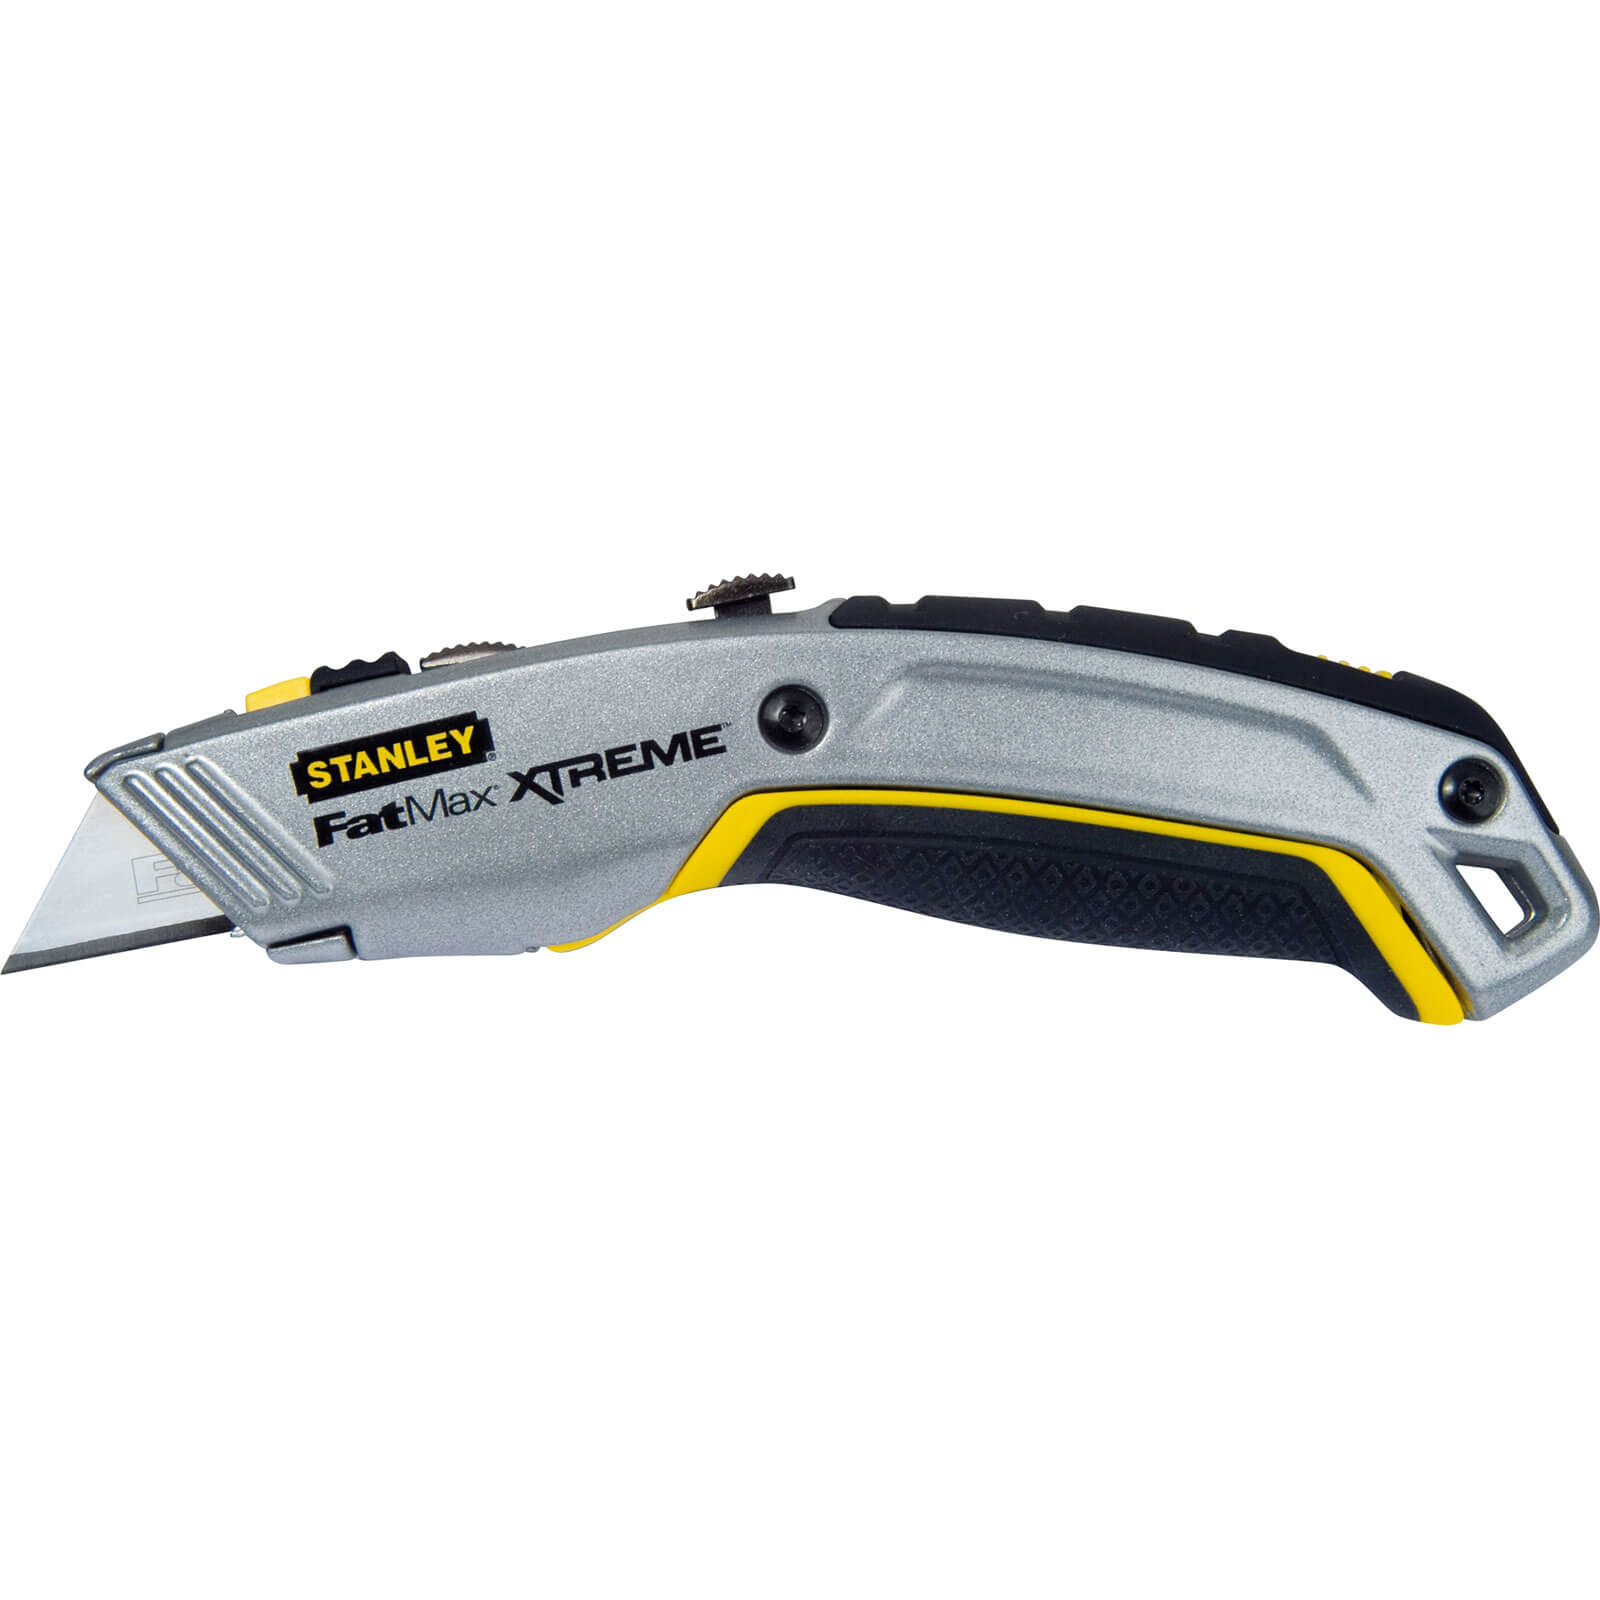 Stanley FatMax XTREME Retractable Twin Blade Knife